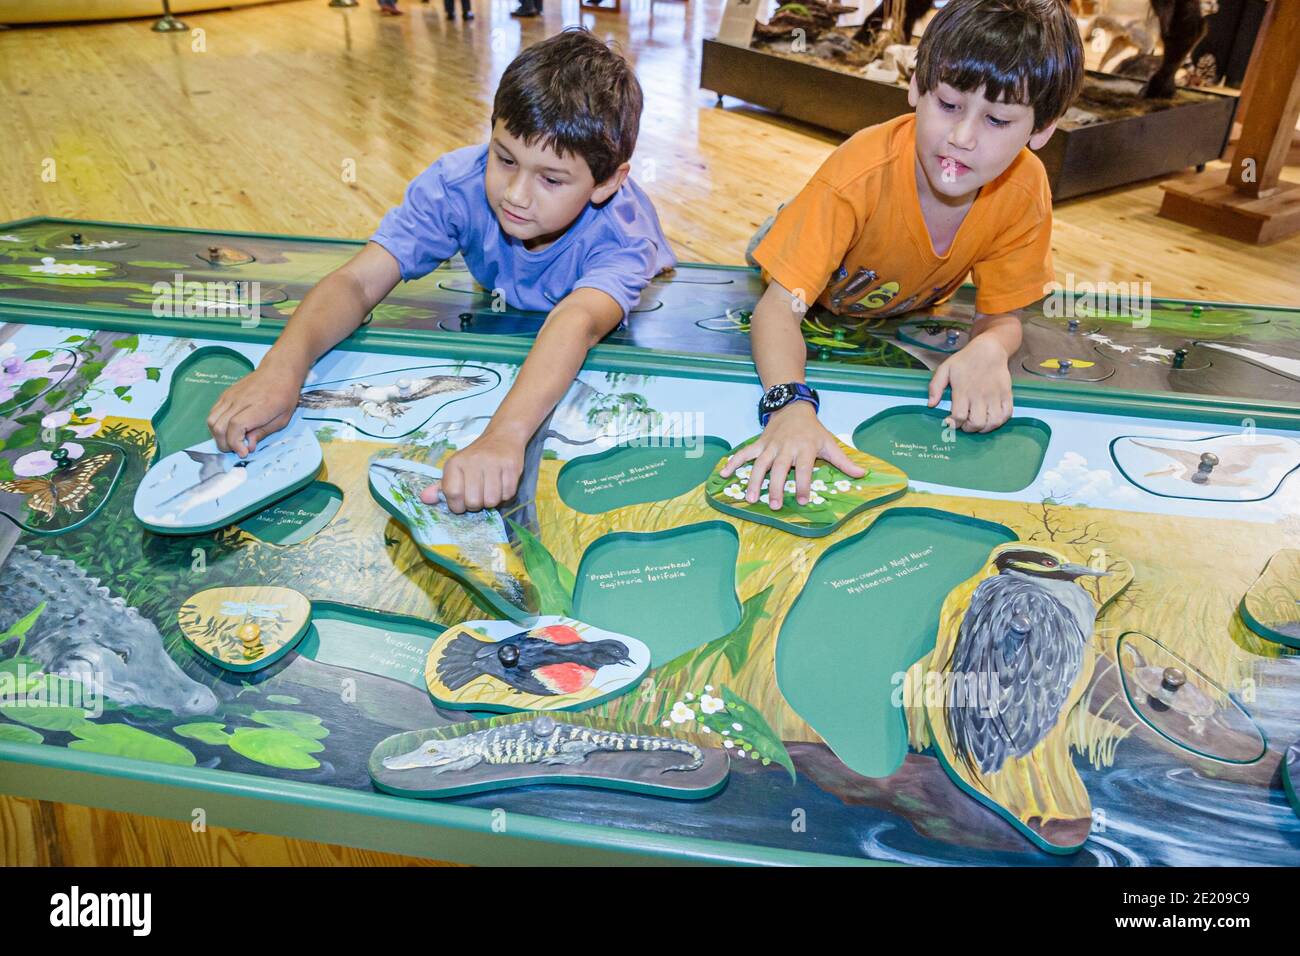 Alabama Spanish Fort 5 Rivers Alabama Delta Resource Center centre,exhibit hands on boys puzzle solving, Stock Photo